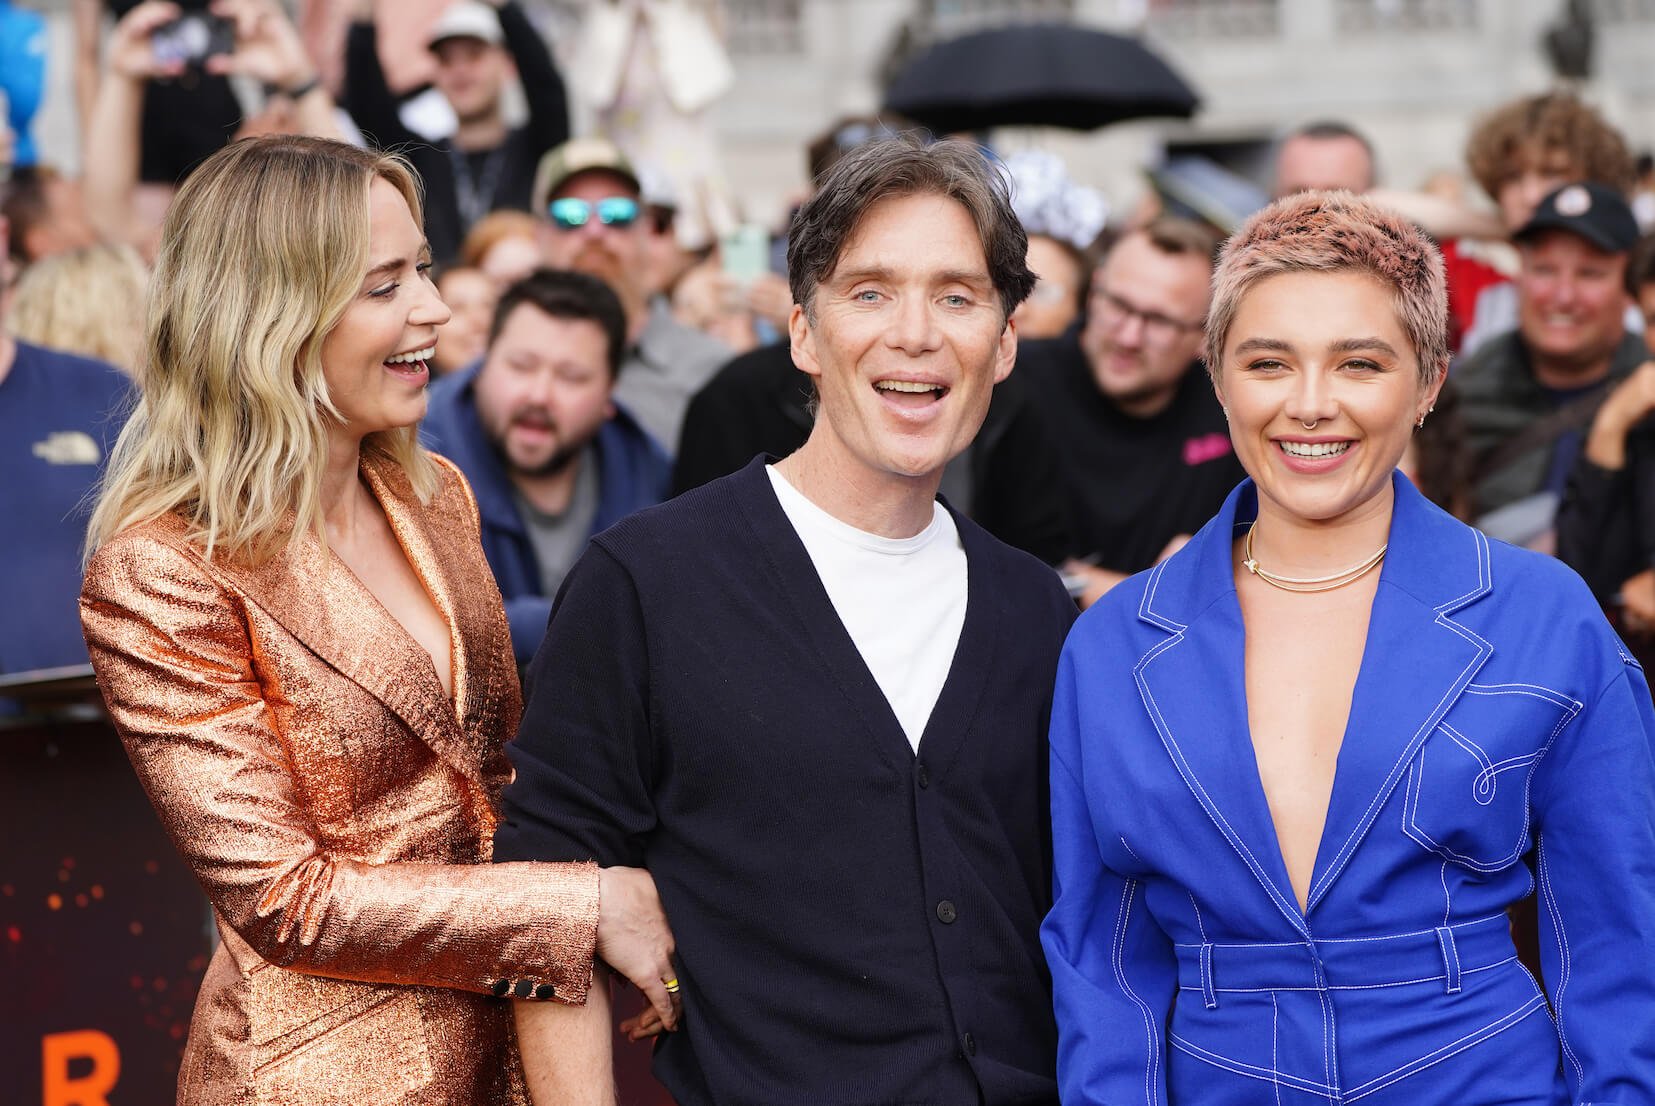 'Oppenheimer' cast members Emily Blunt, Cillian Murphy, and Florence Pugh having fun at the premiere 